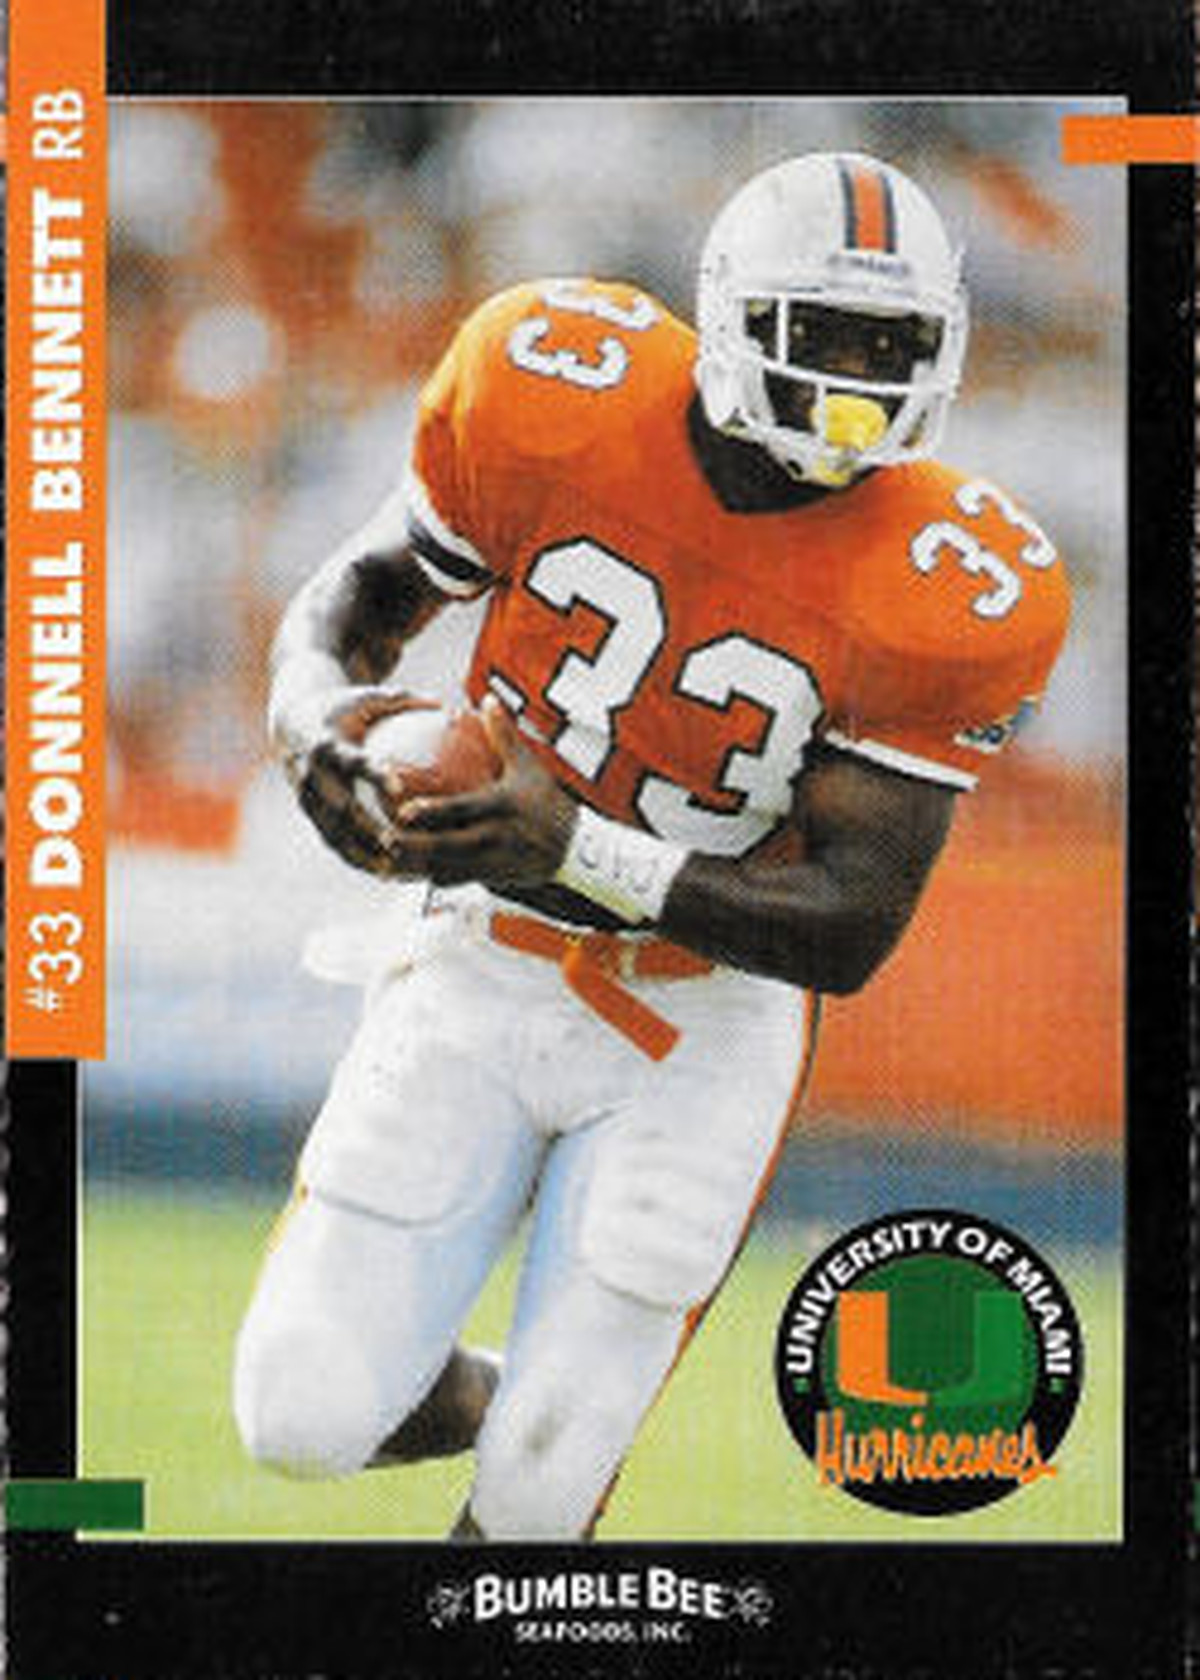 donnell_bennett_1993_miami_hurricanes_bumble_bee_sga.png